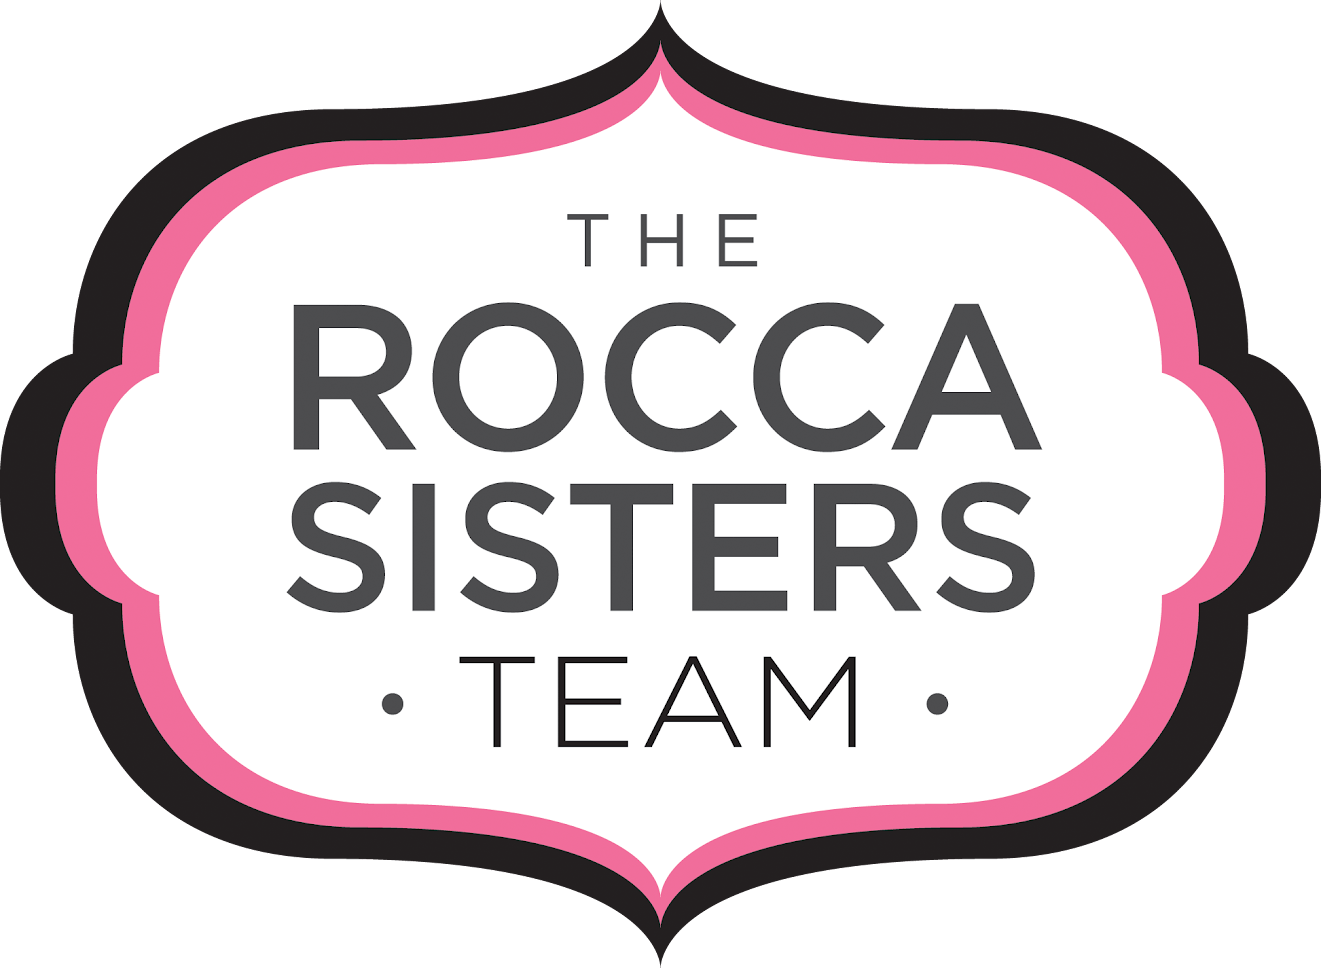 The Rocca Sisters Team